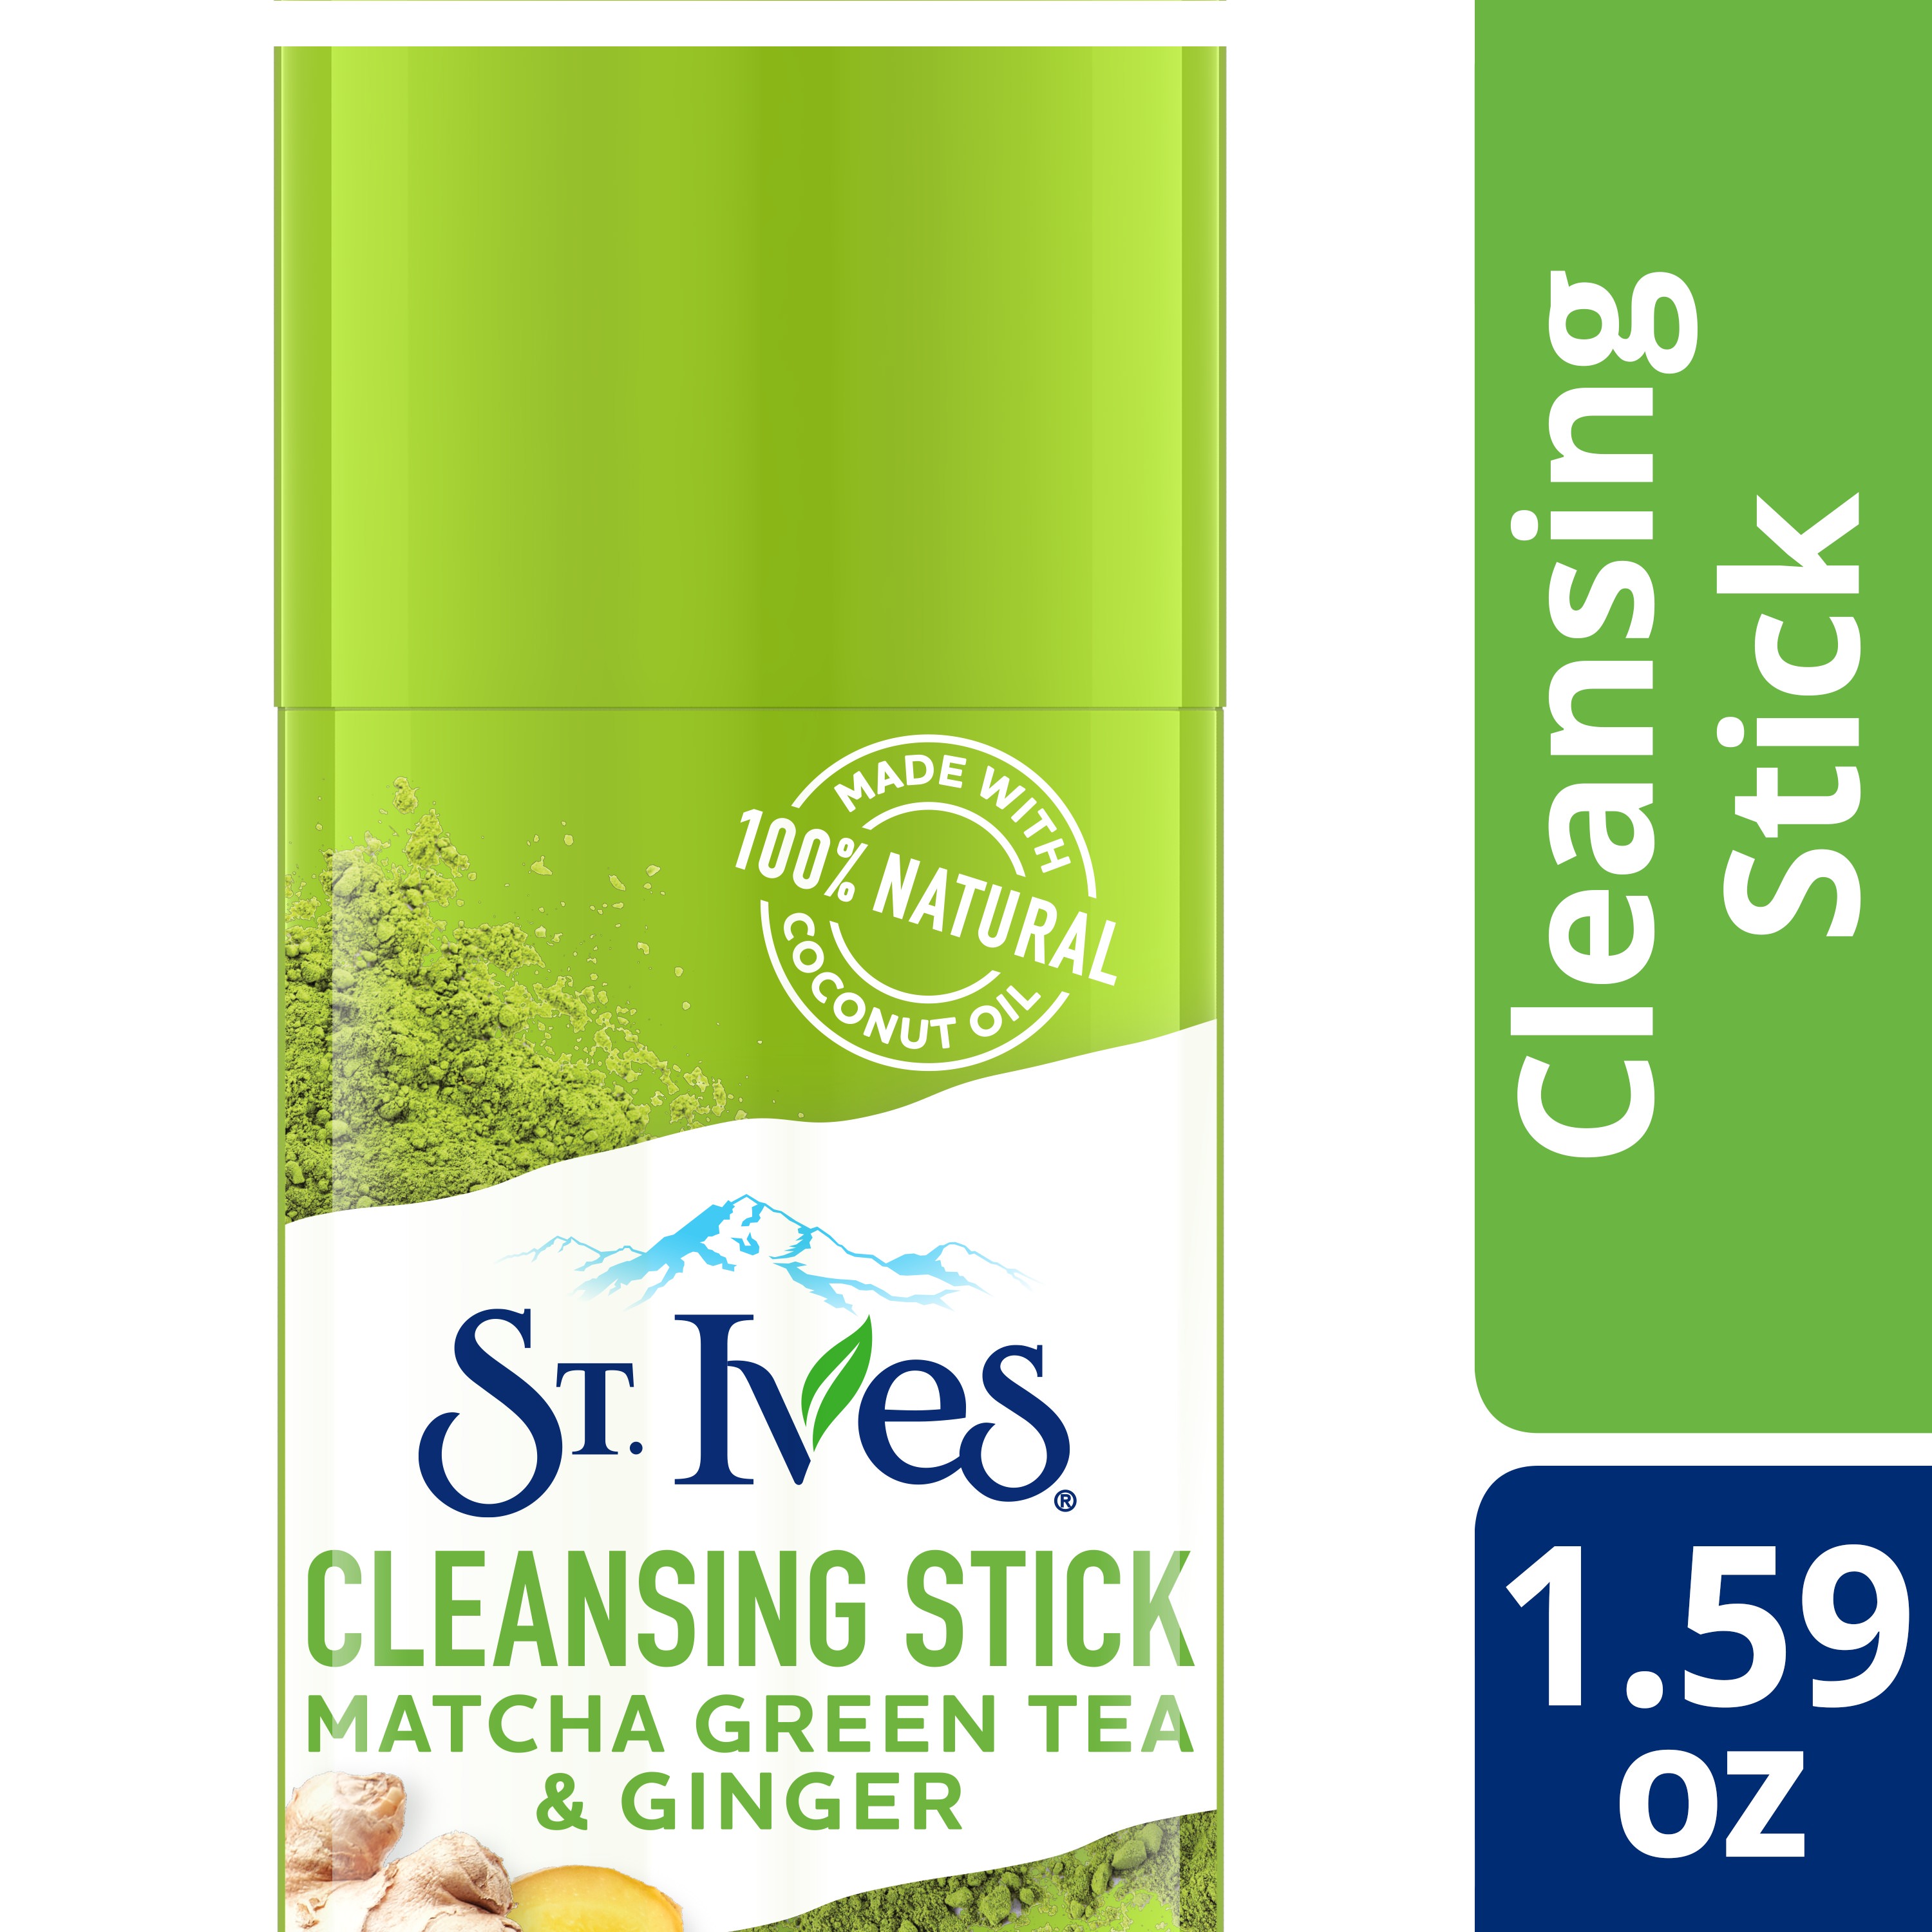 St. Ives Matcha Green Tea and Ginger Cleansing Stick, 1.6 oz - image 2 of 5